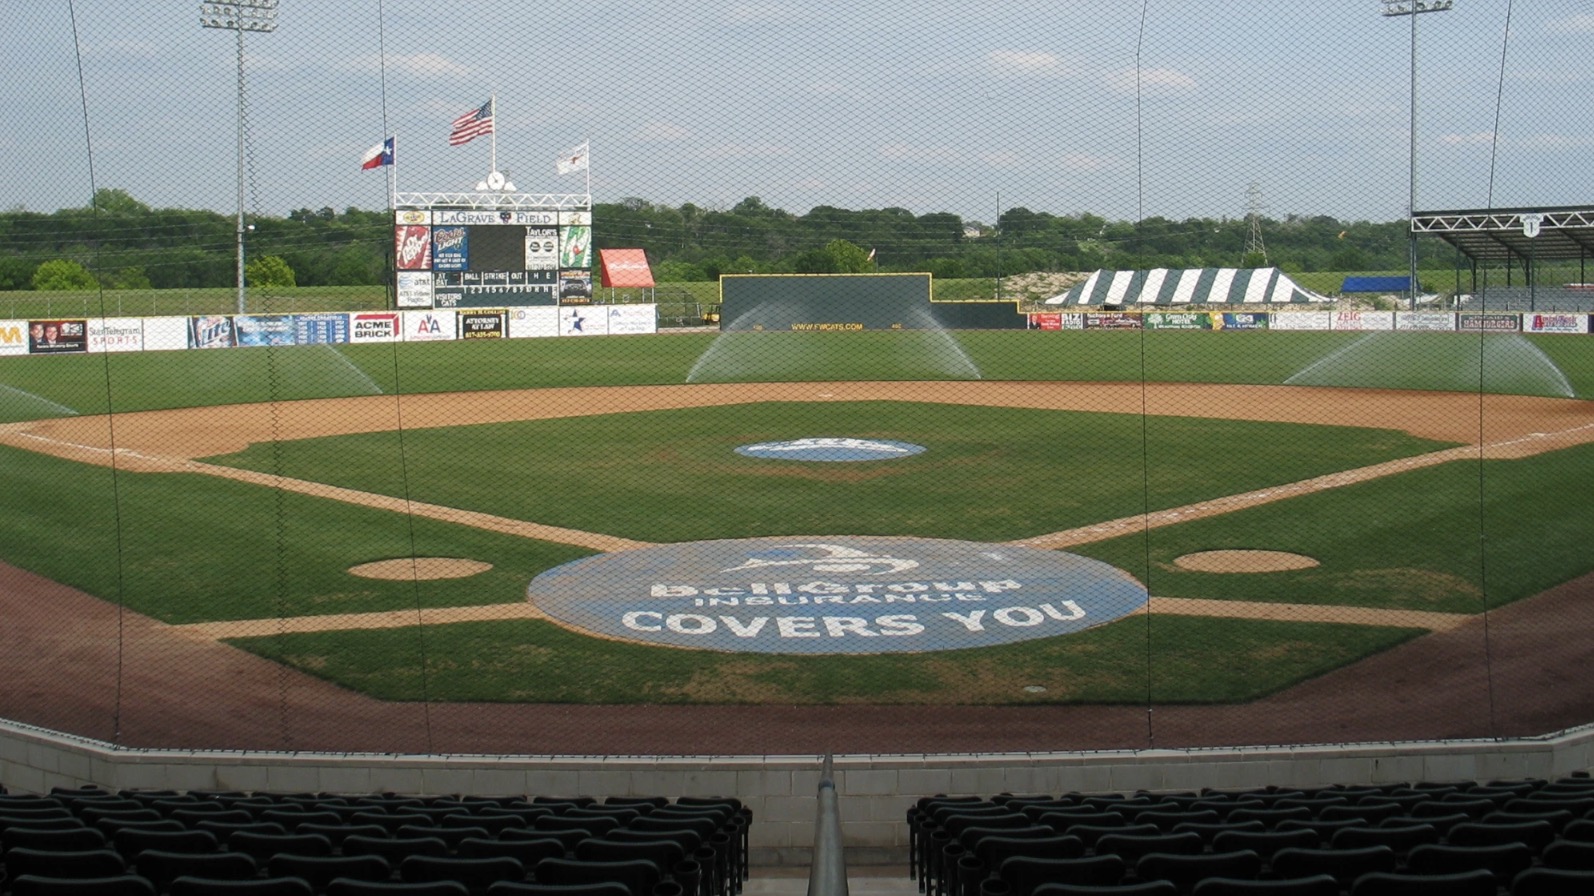 LaGrave Field was opened in 2002 at a cost of $4million